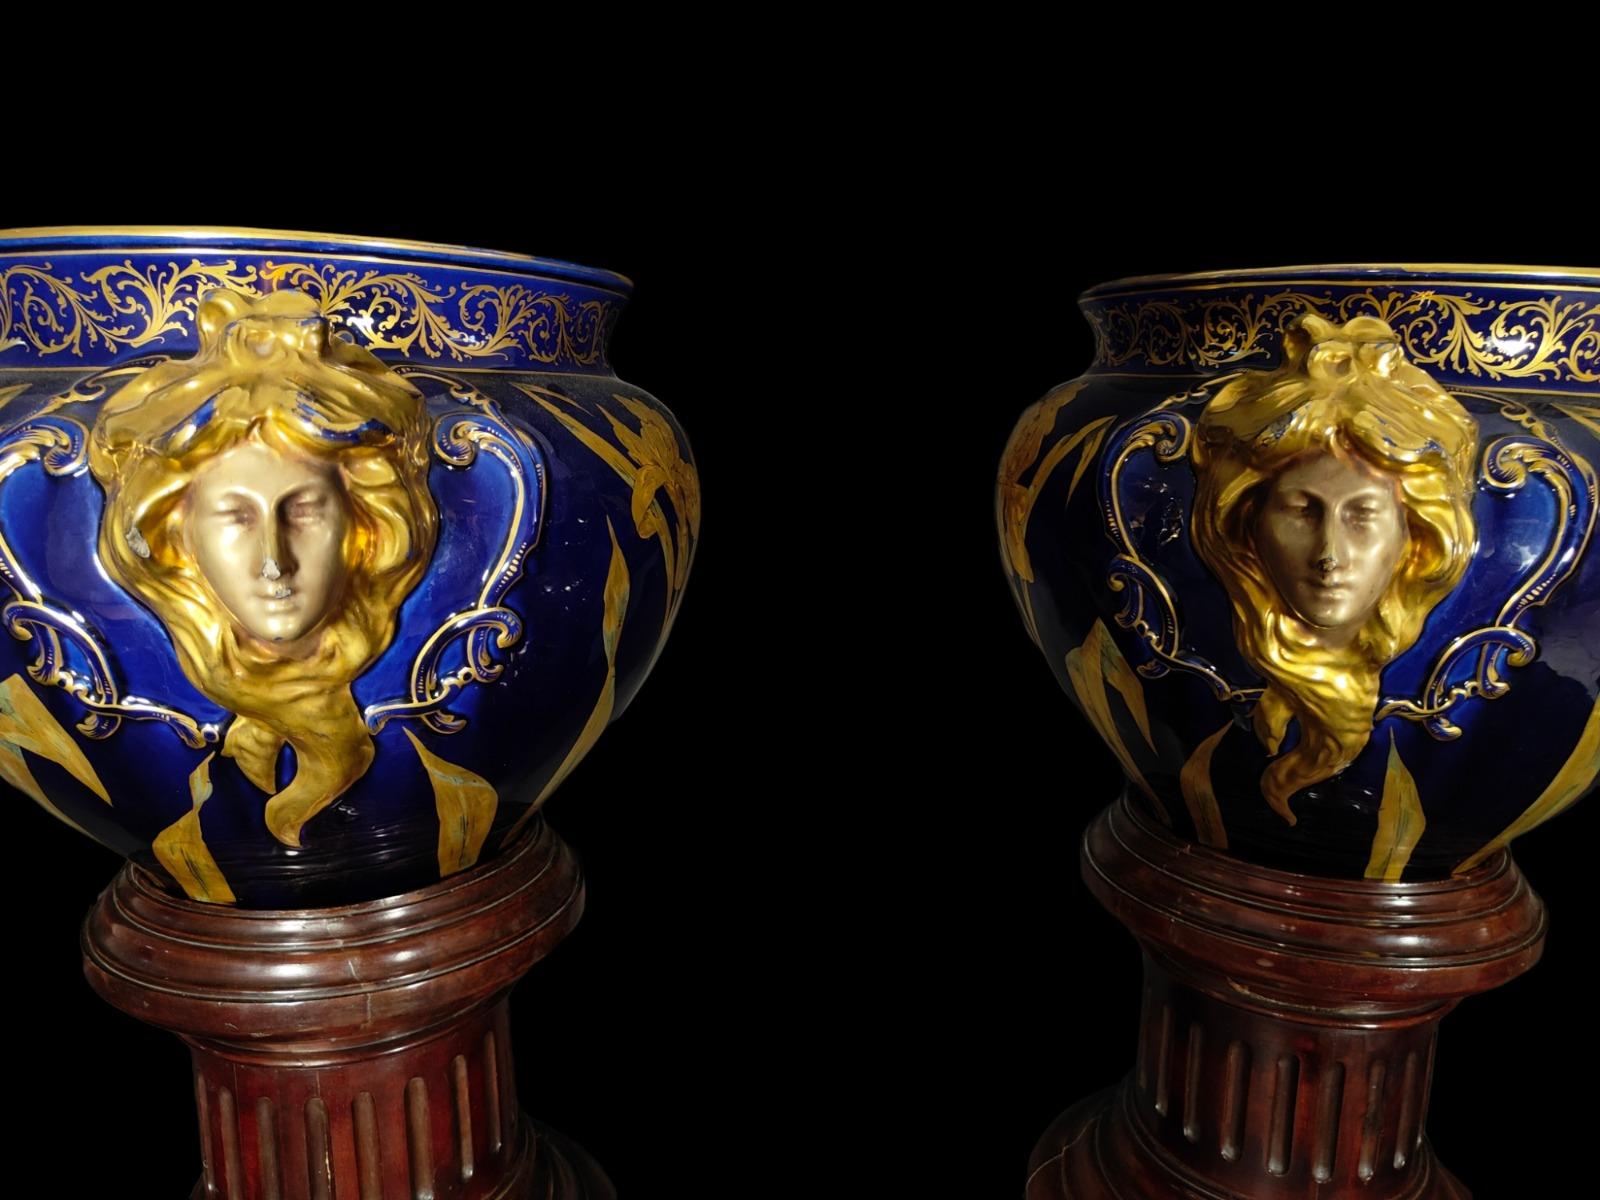 Pair of art nouveau planters. Cobalt blue enamel and partially gilt. With illegible marks on the base. On column-shaped wooden bases varnished simulating mahogany.With some minore looses and repair-please see photos. Measurements: 31 x 52 x 40 cm;